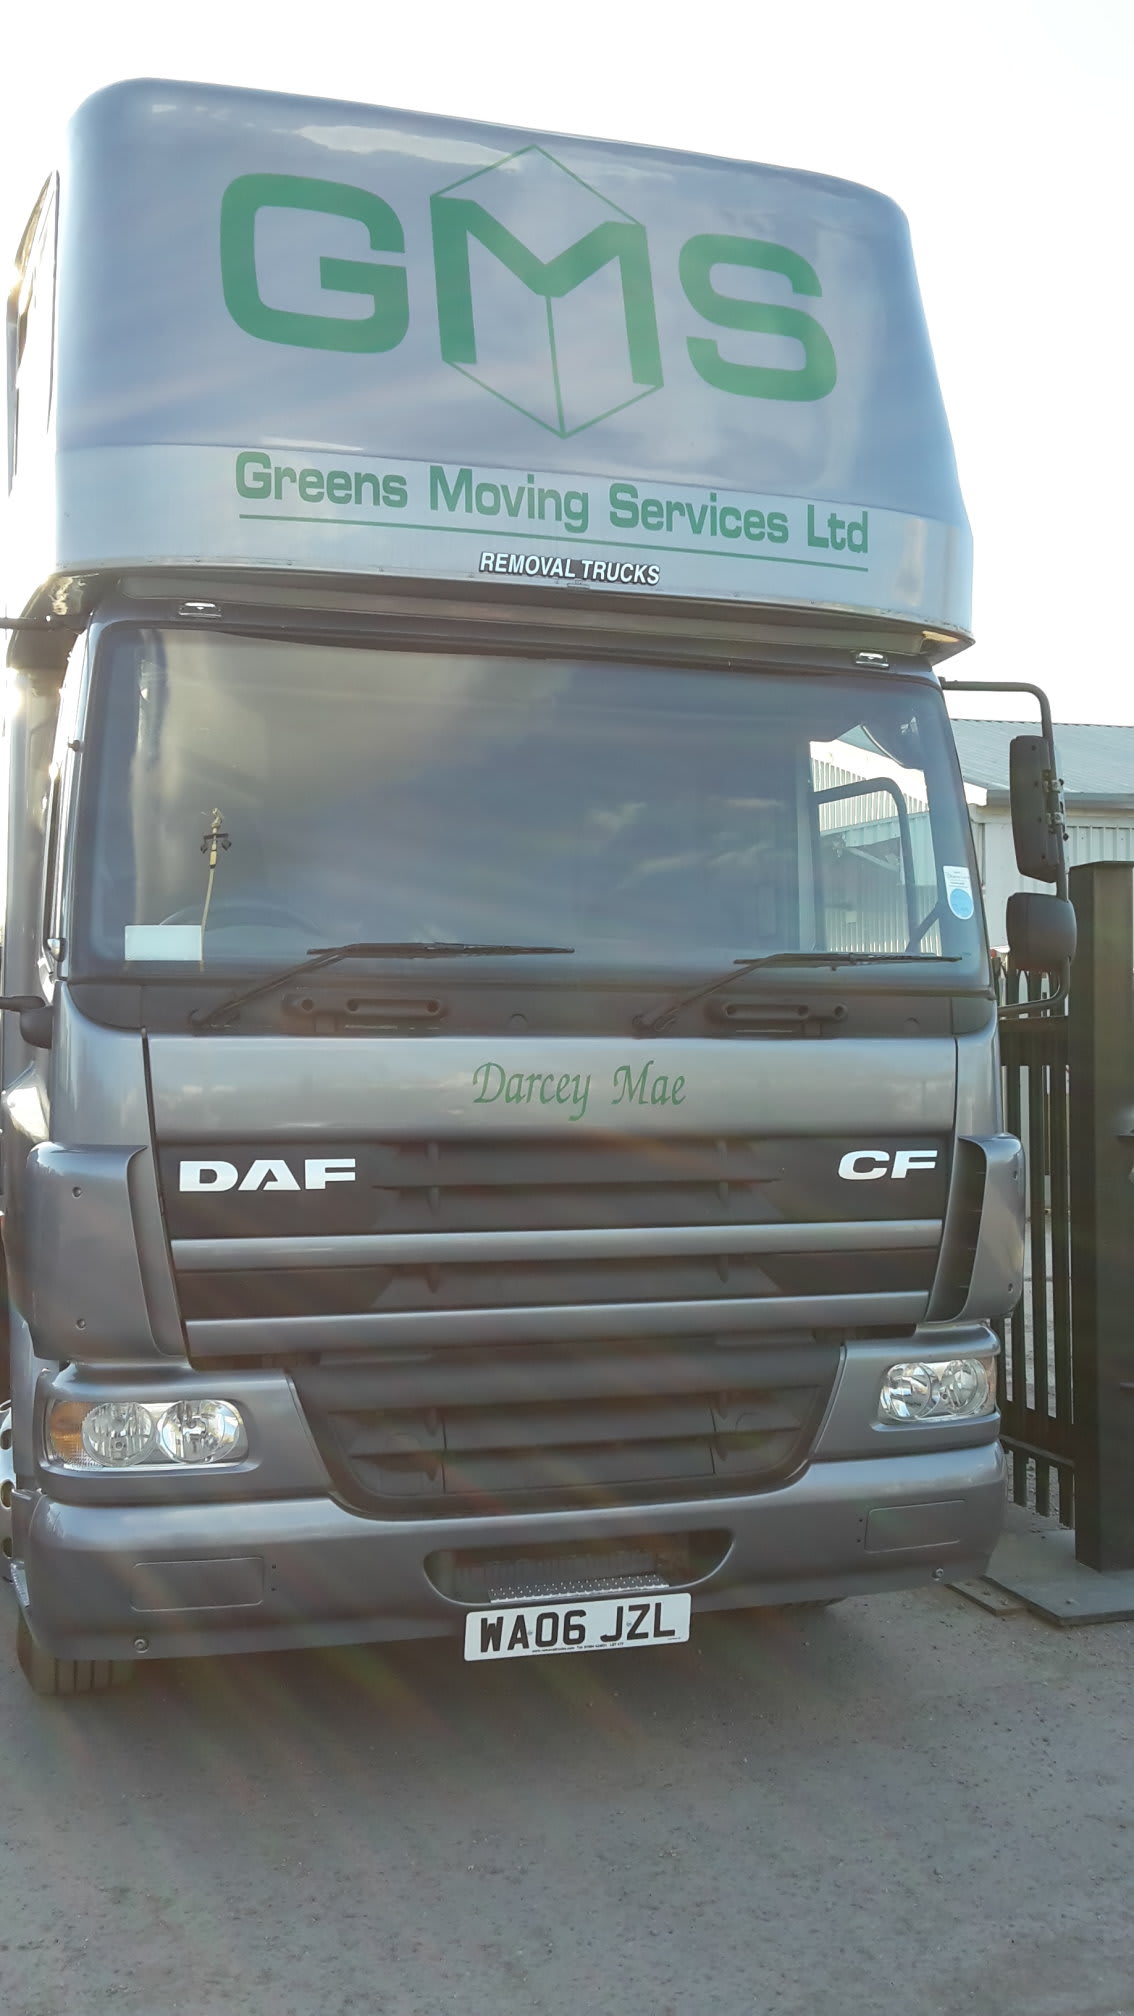 Images Greens Moving Services Ltd